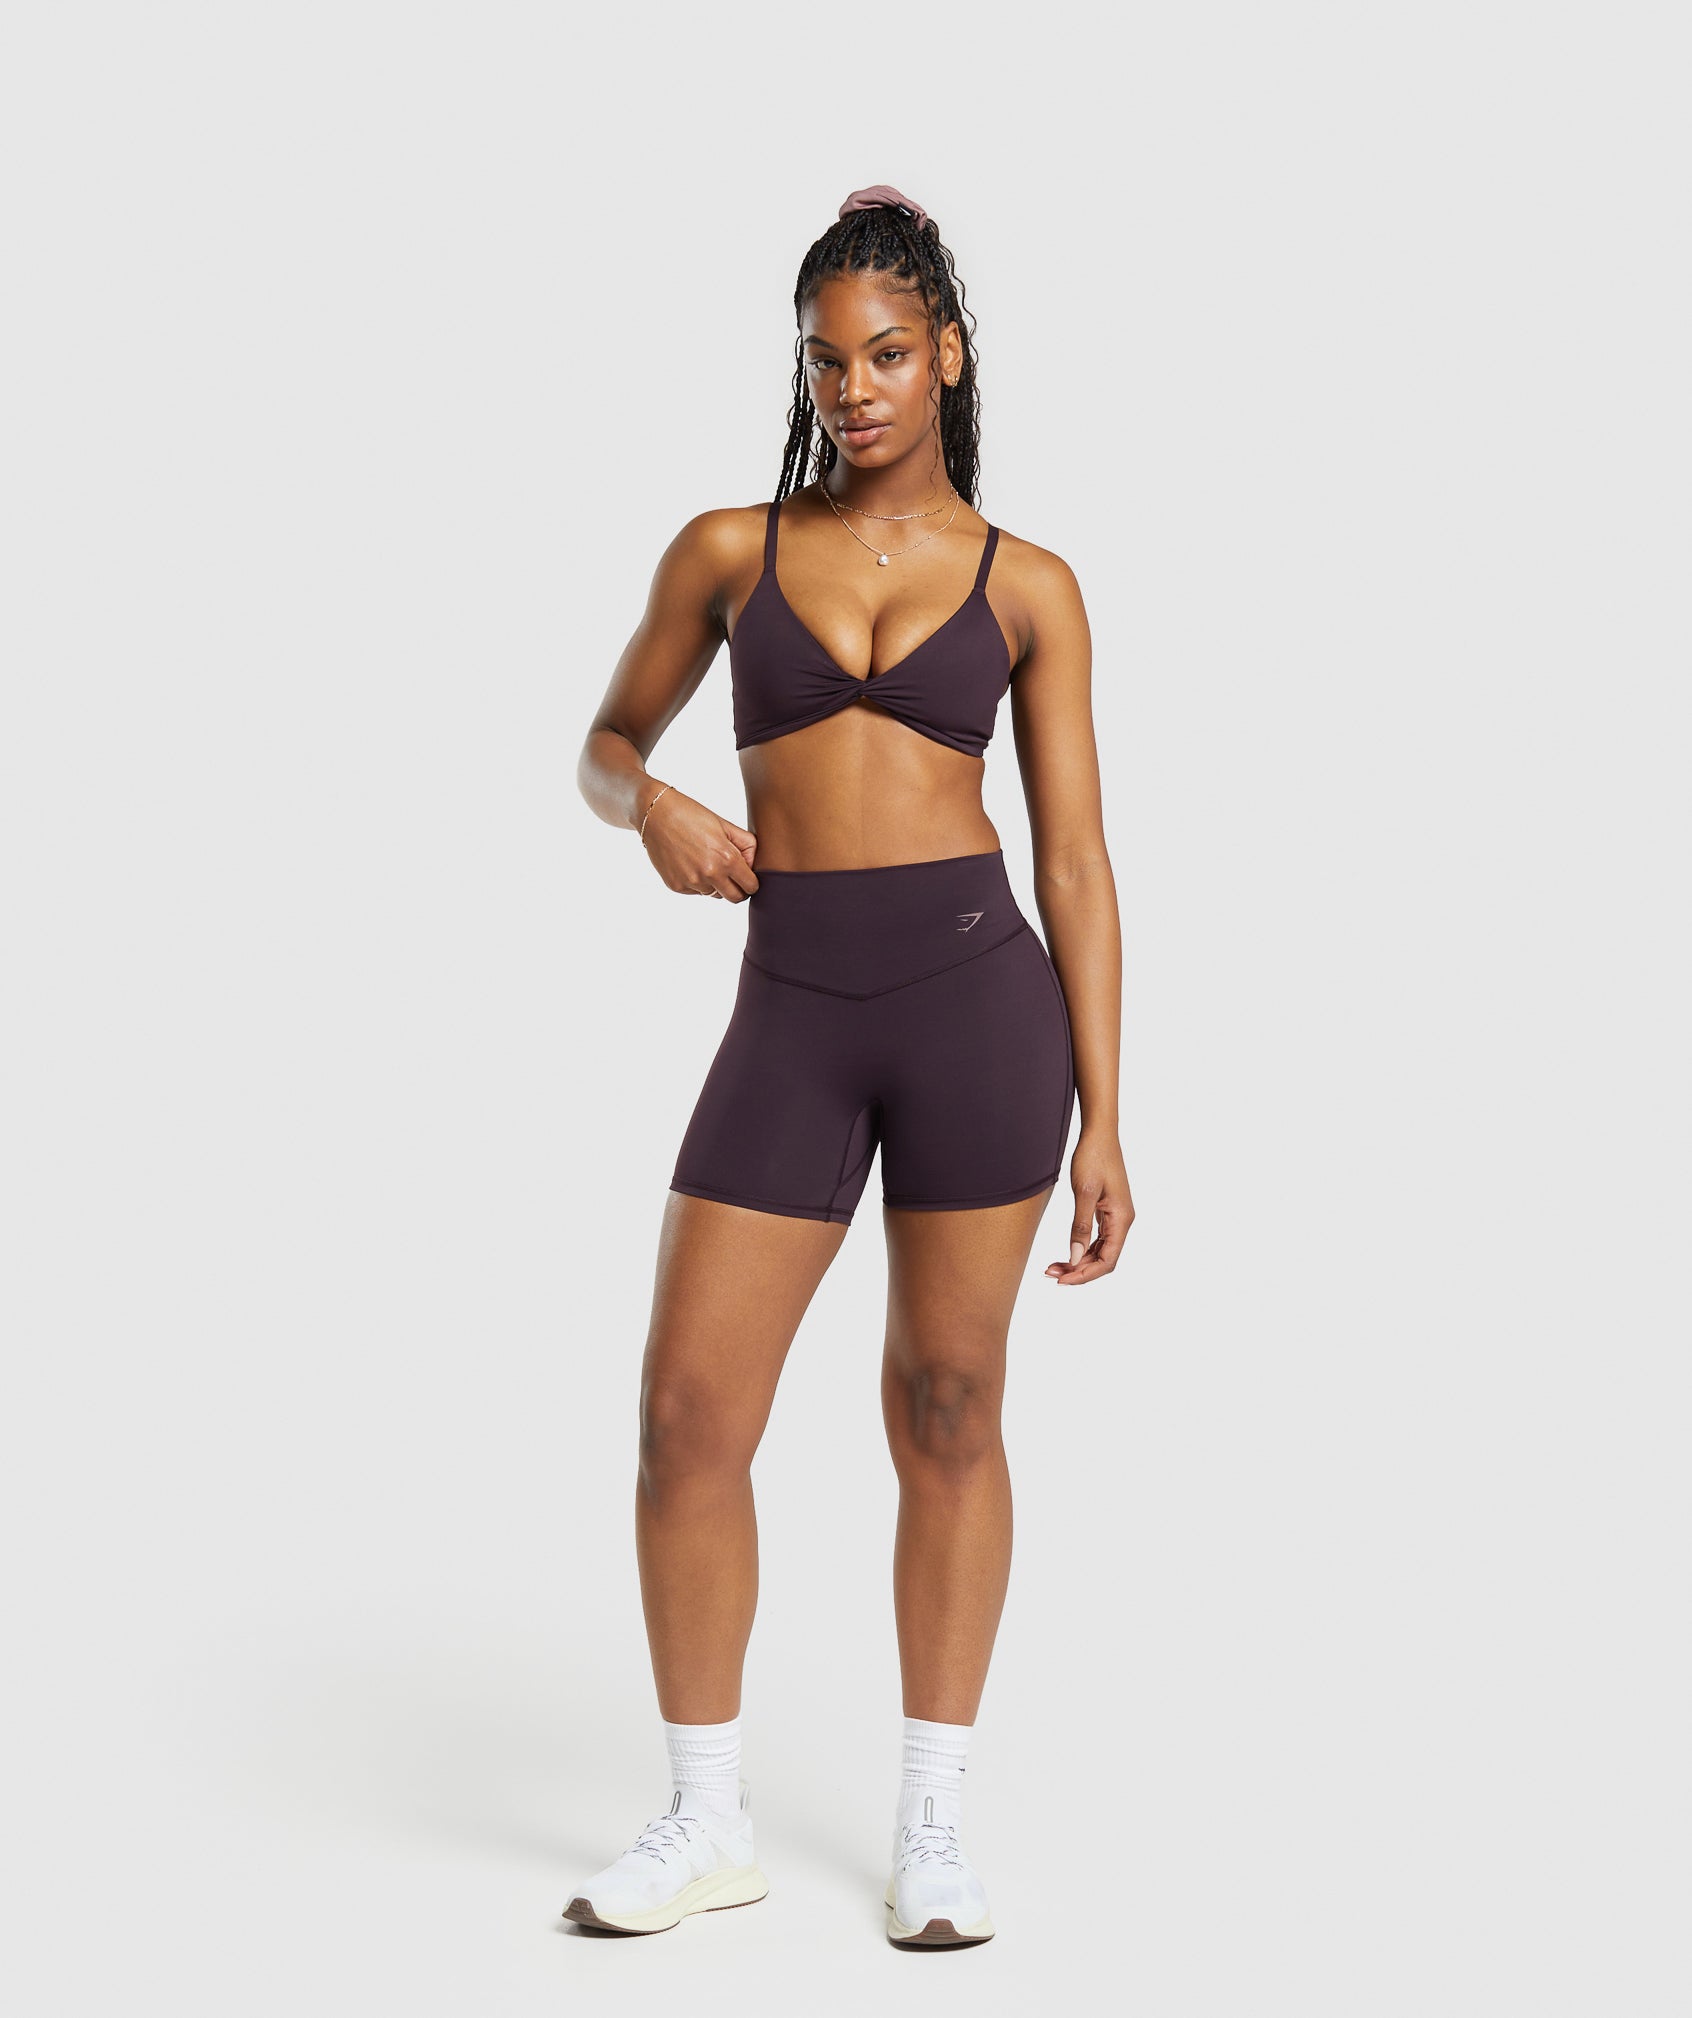 Elevate Shorts in Plum Brown - view 4